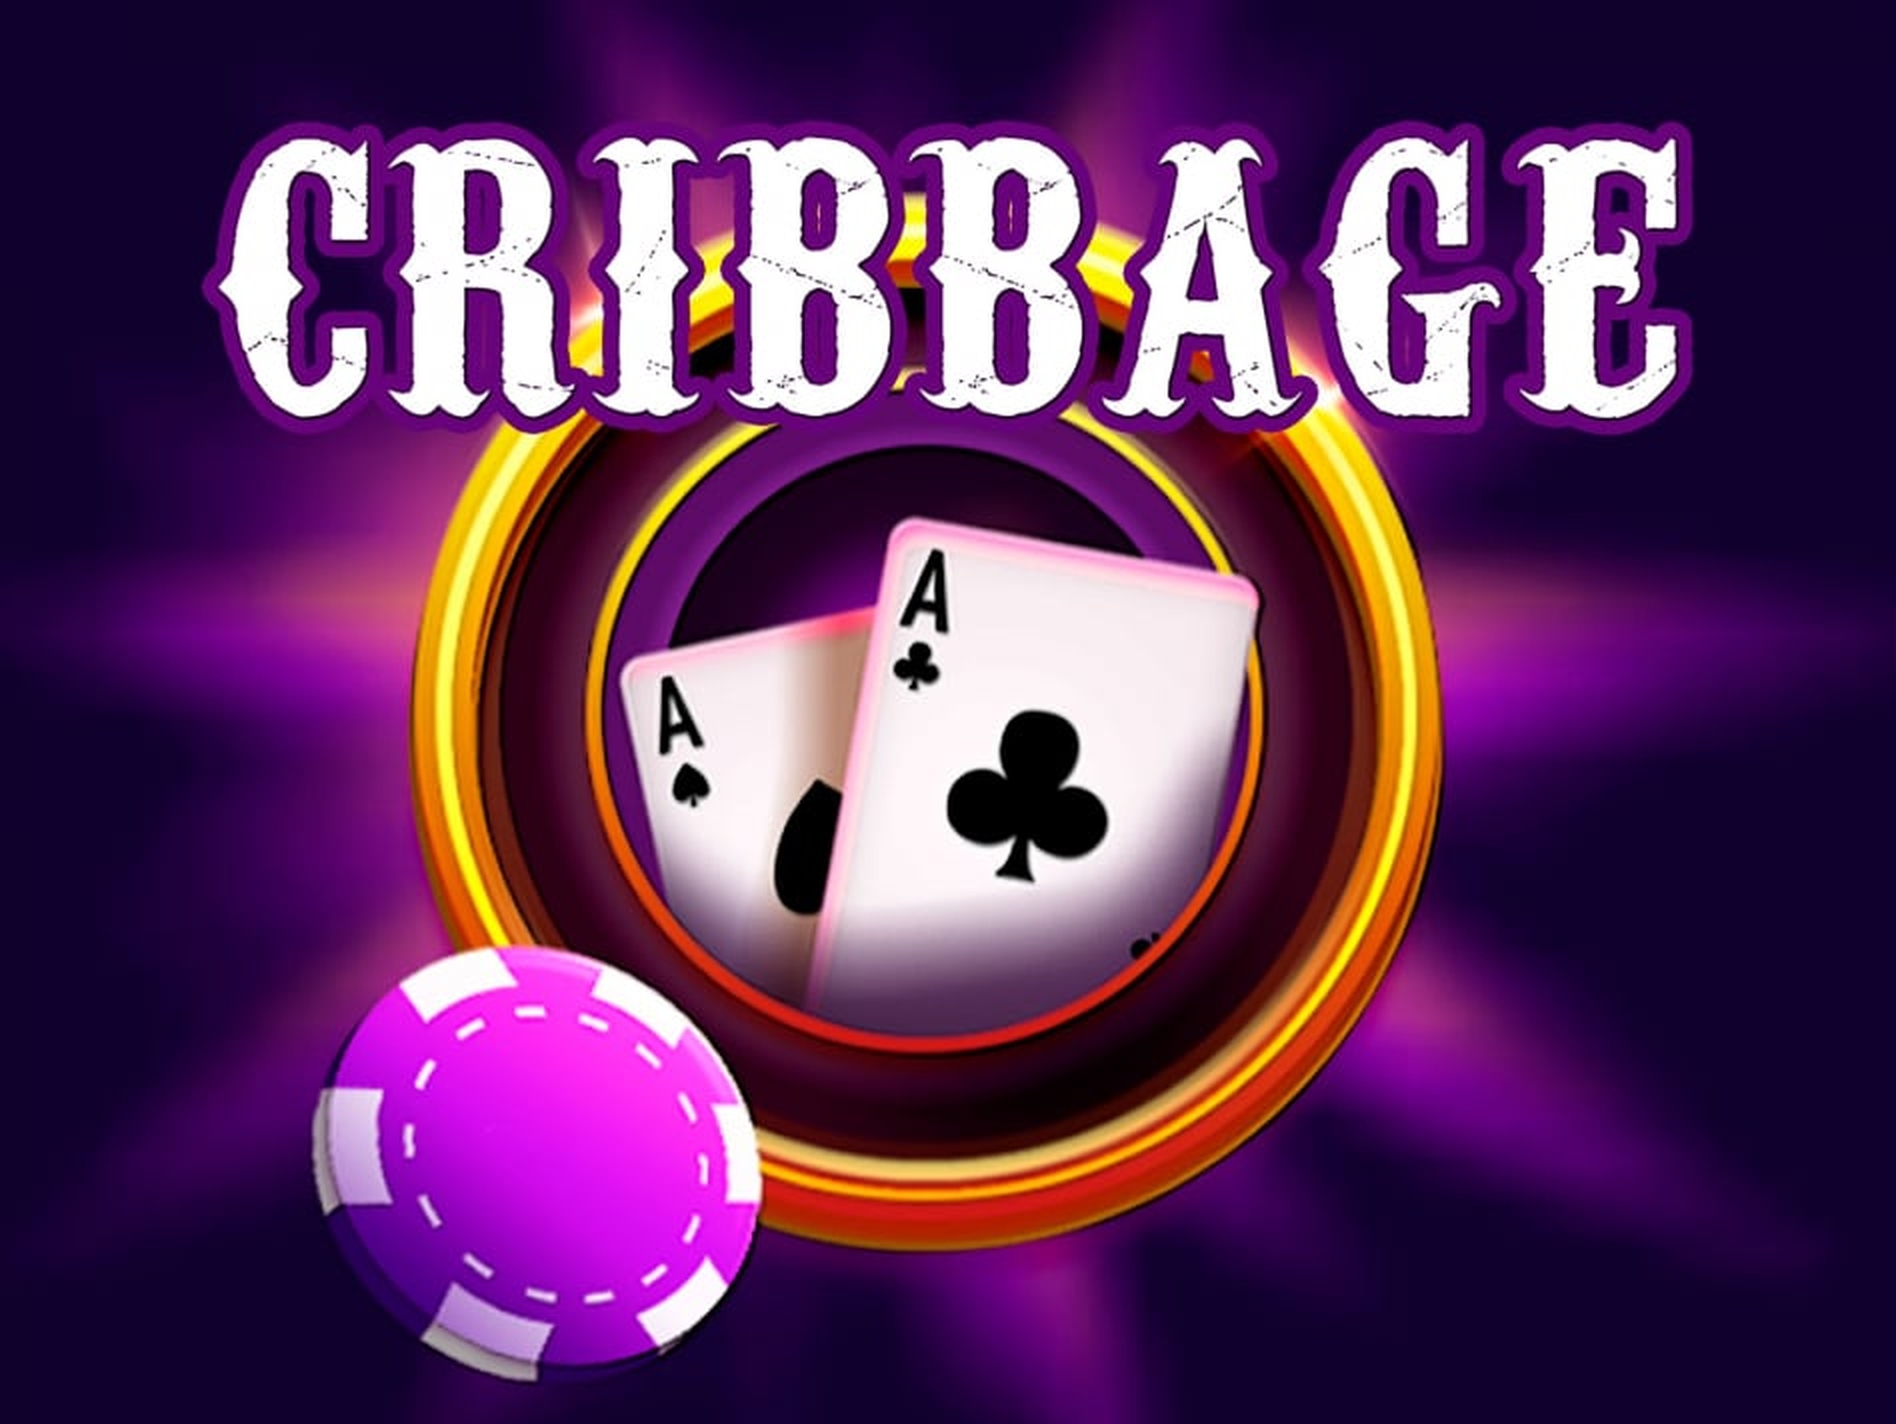 The Cribbage Online Slot Demo Game by 1x2 Gaming